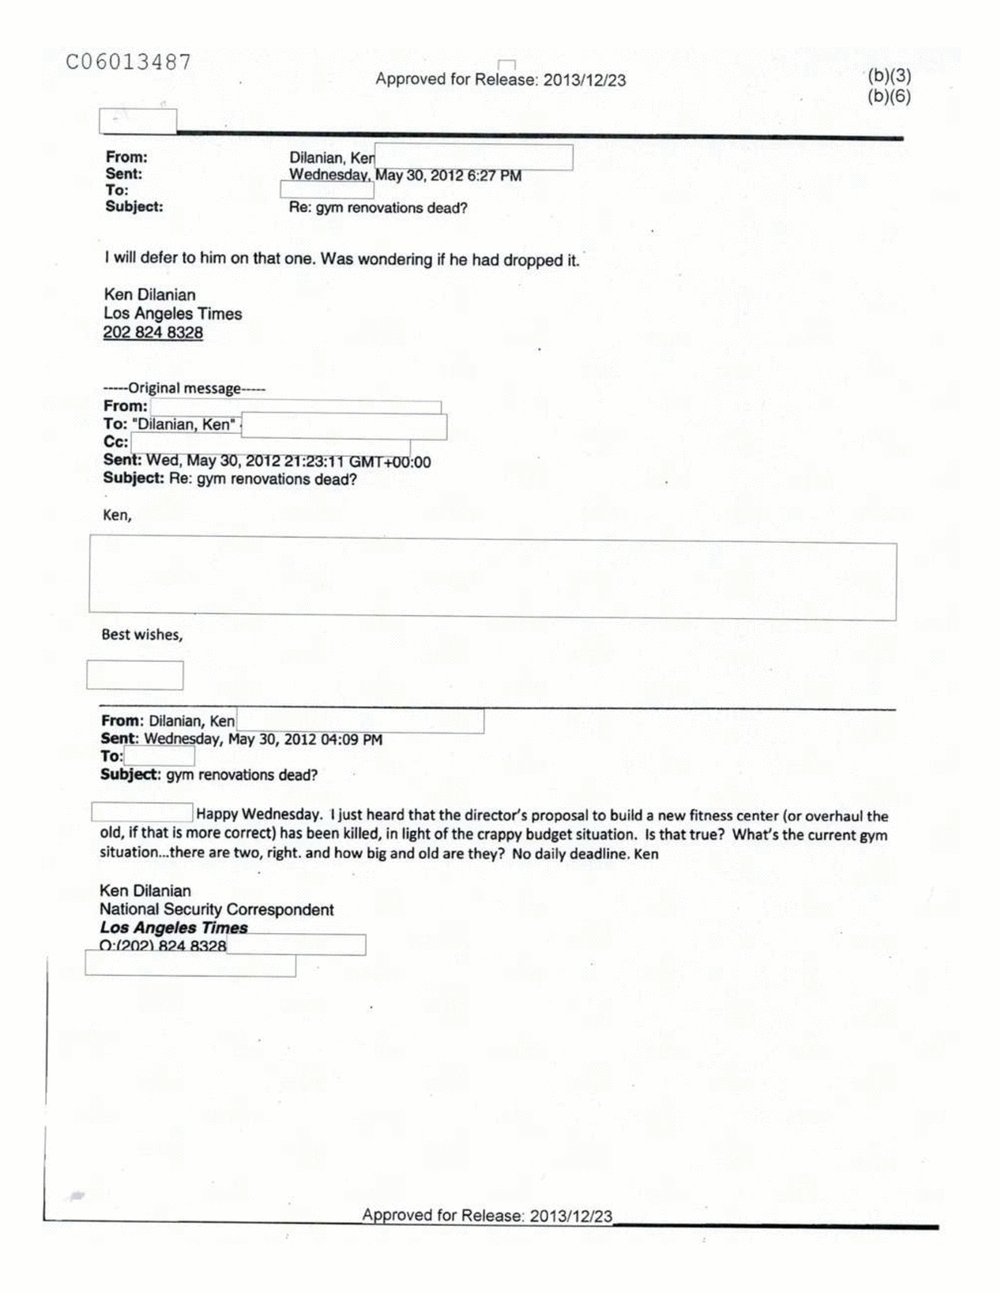 Page 334 from Email Correspondence Between Reporters and CIA Flacks